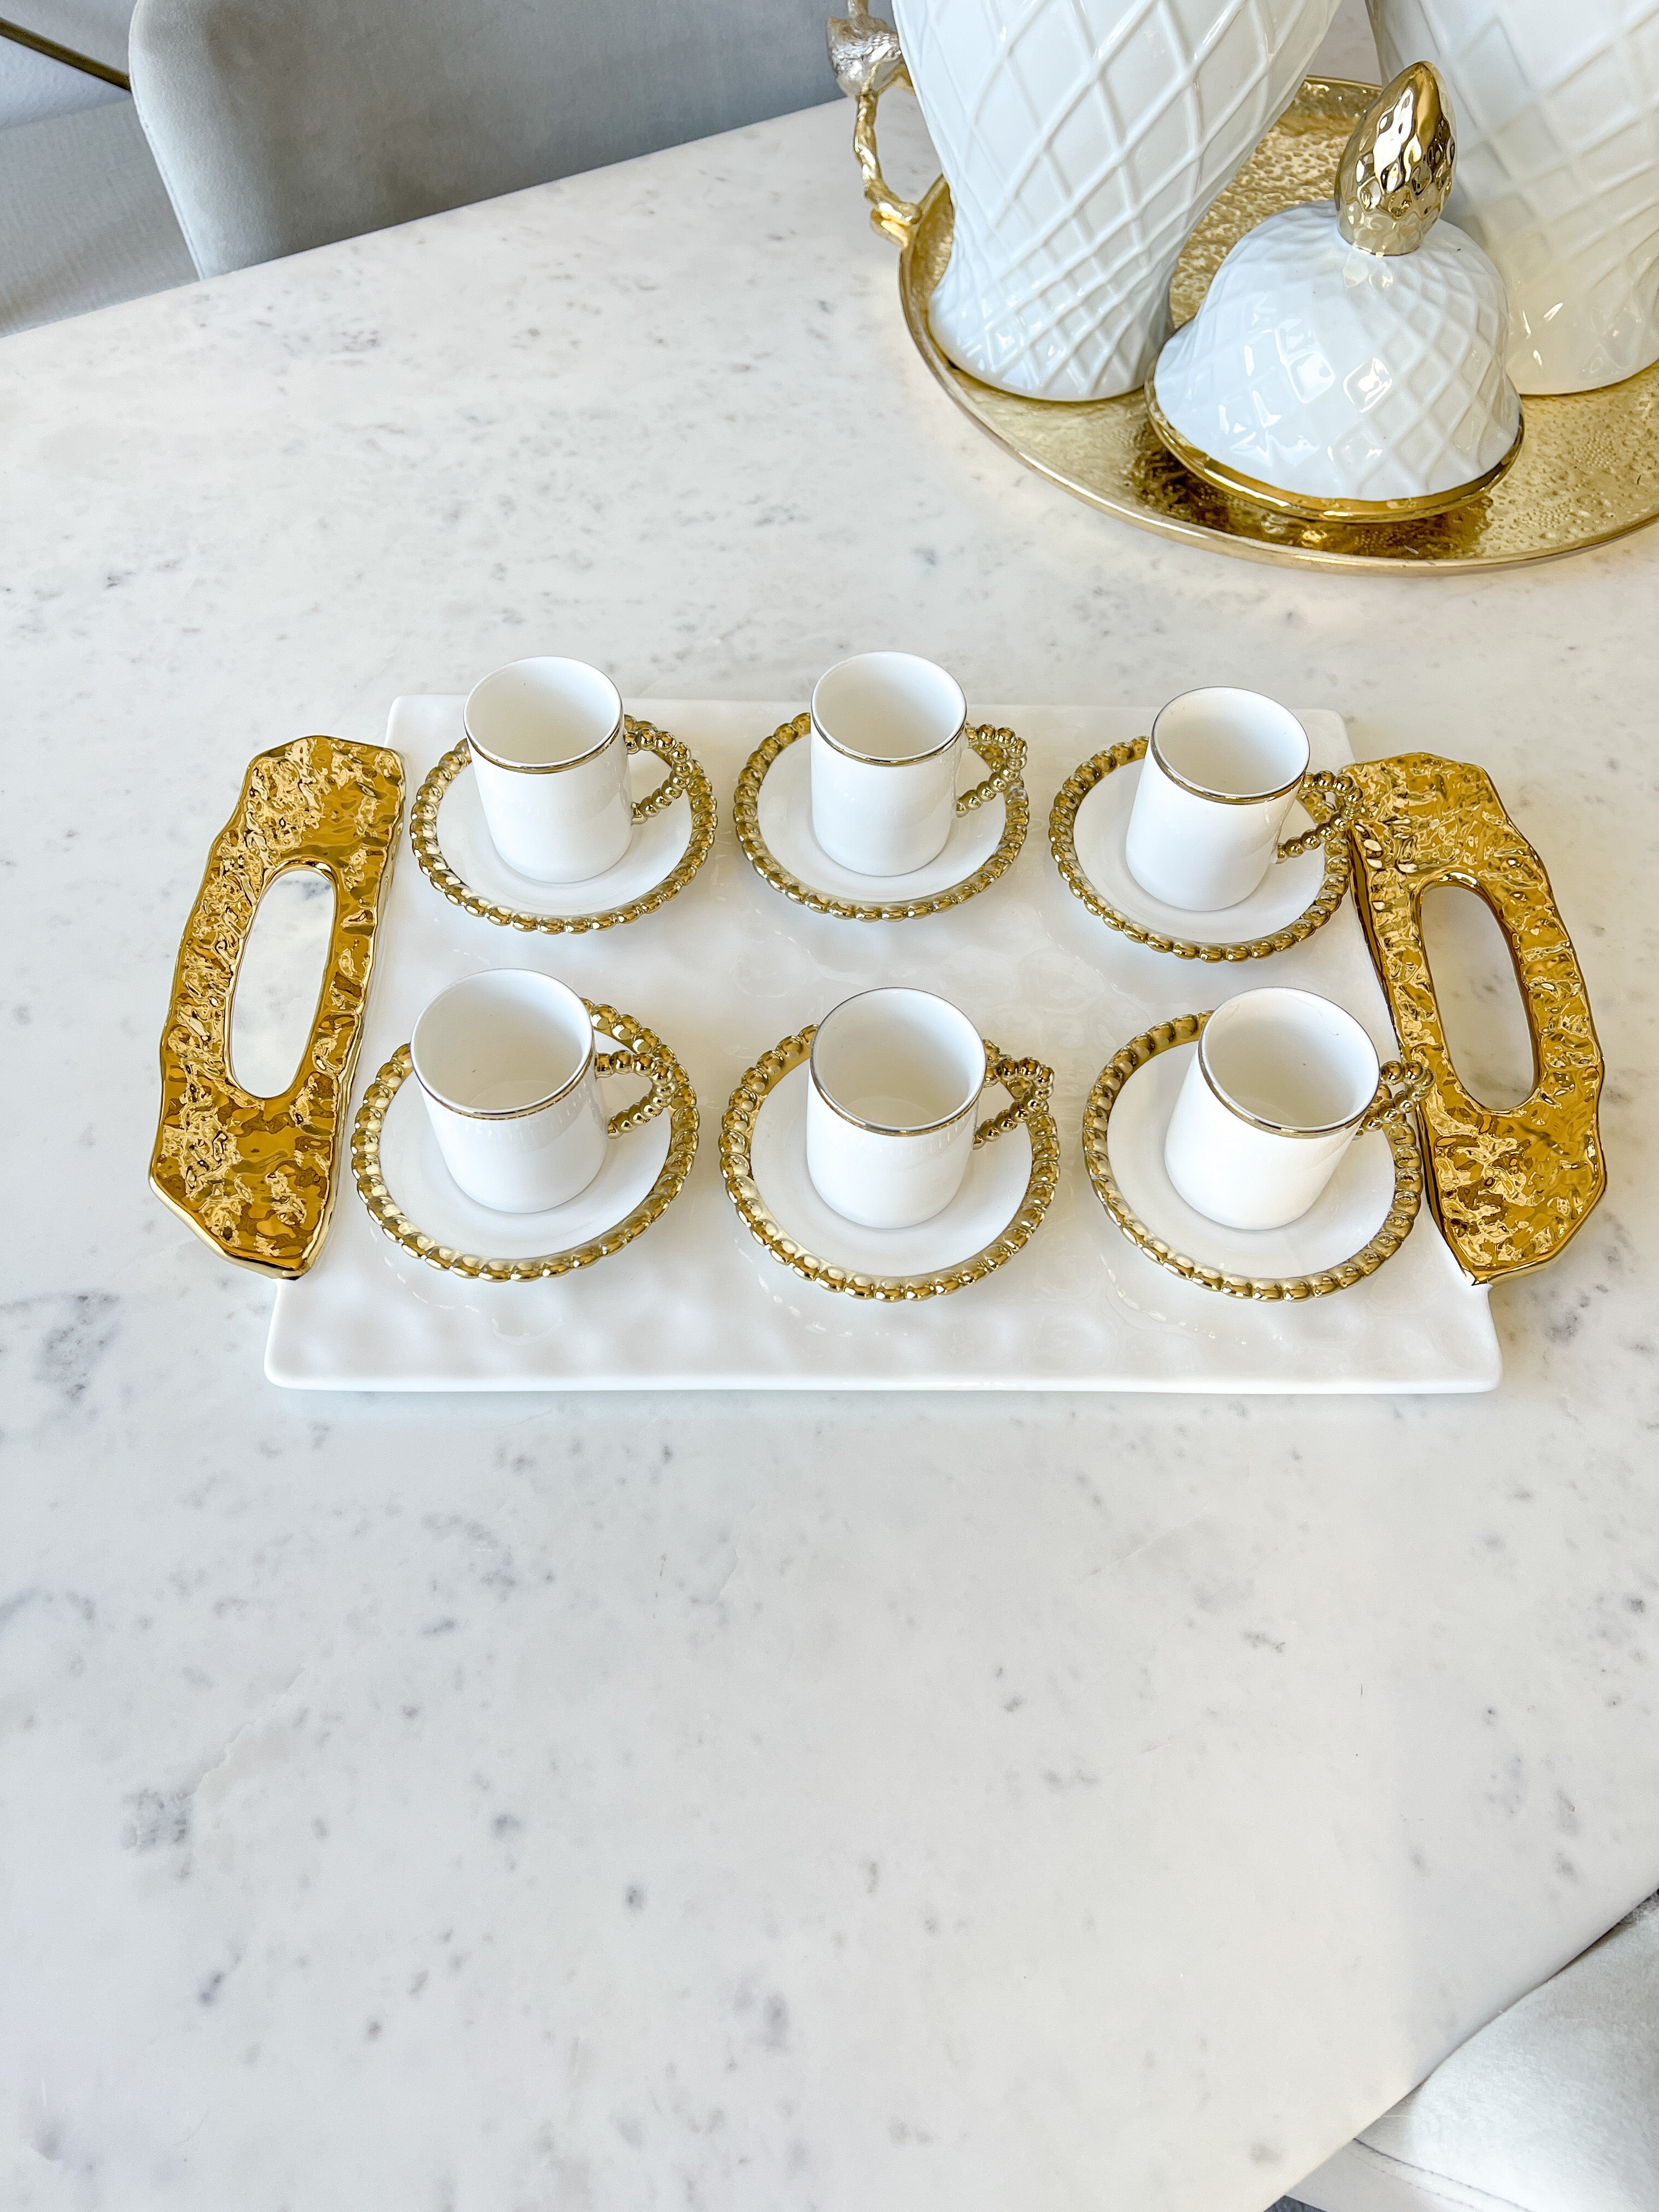 Gold Beaded Espresso Cups with Saucer (Set of 6) - HTS HOME DECOR